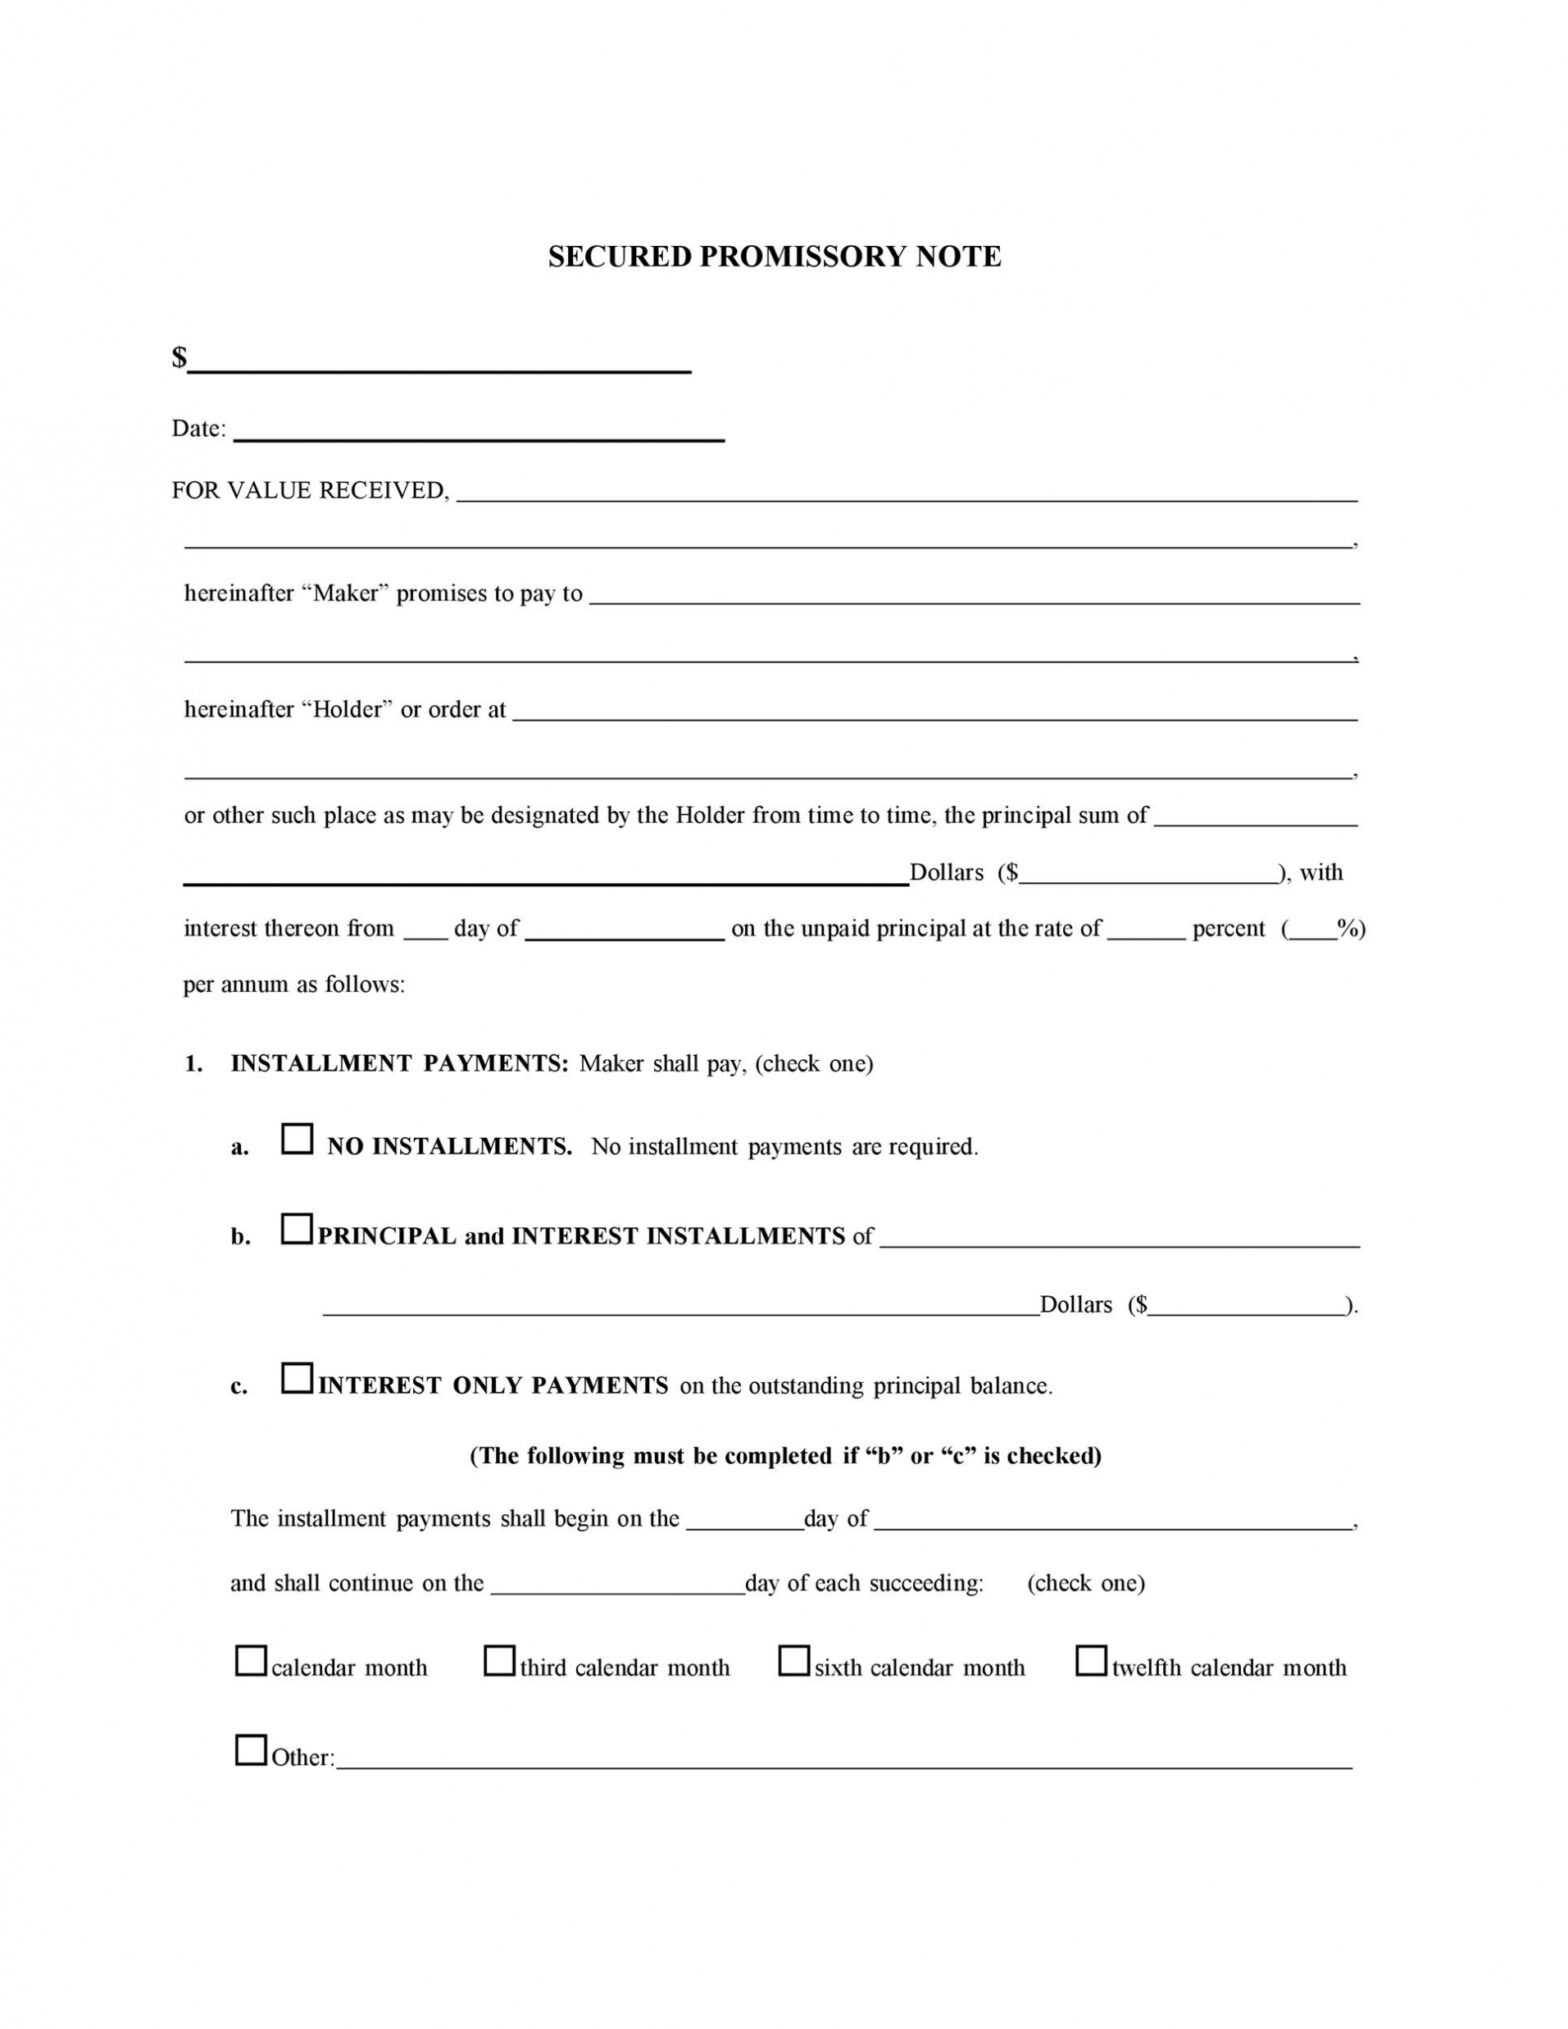 45 Free Promissory Note Templates &amp; Forms [Word &amp; Pdf] ᐅ with Promisory Note Template